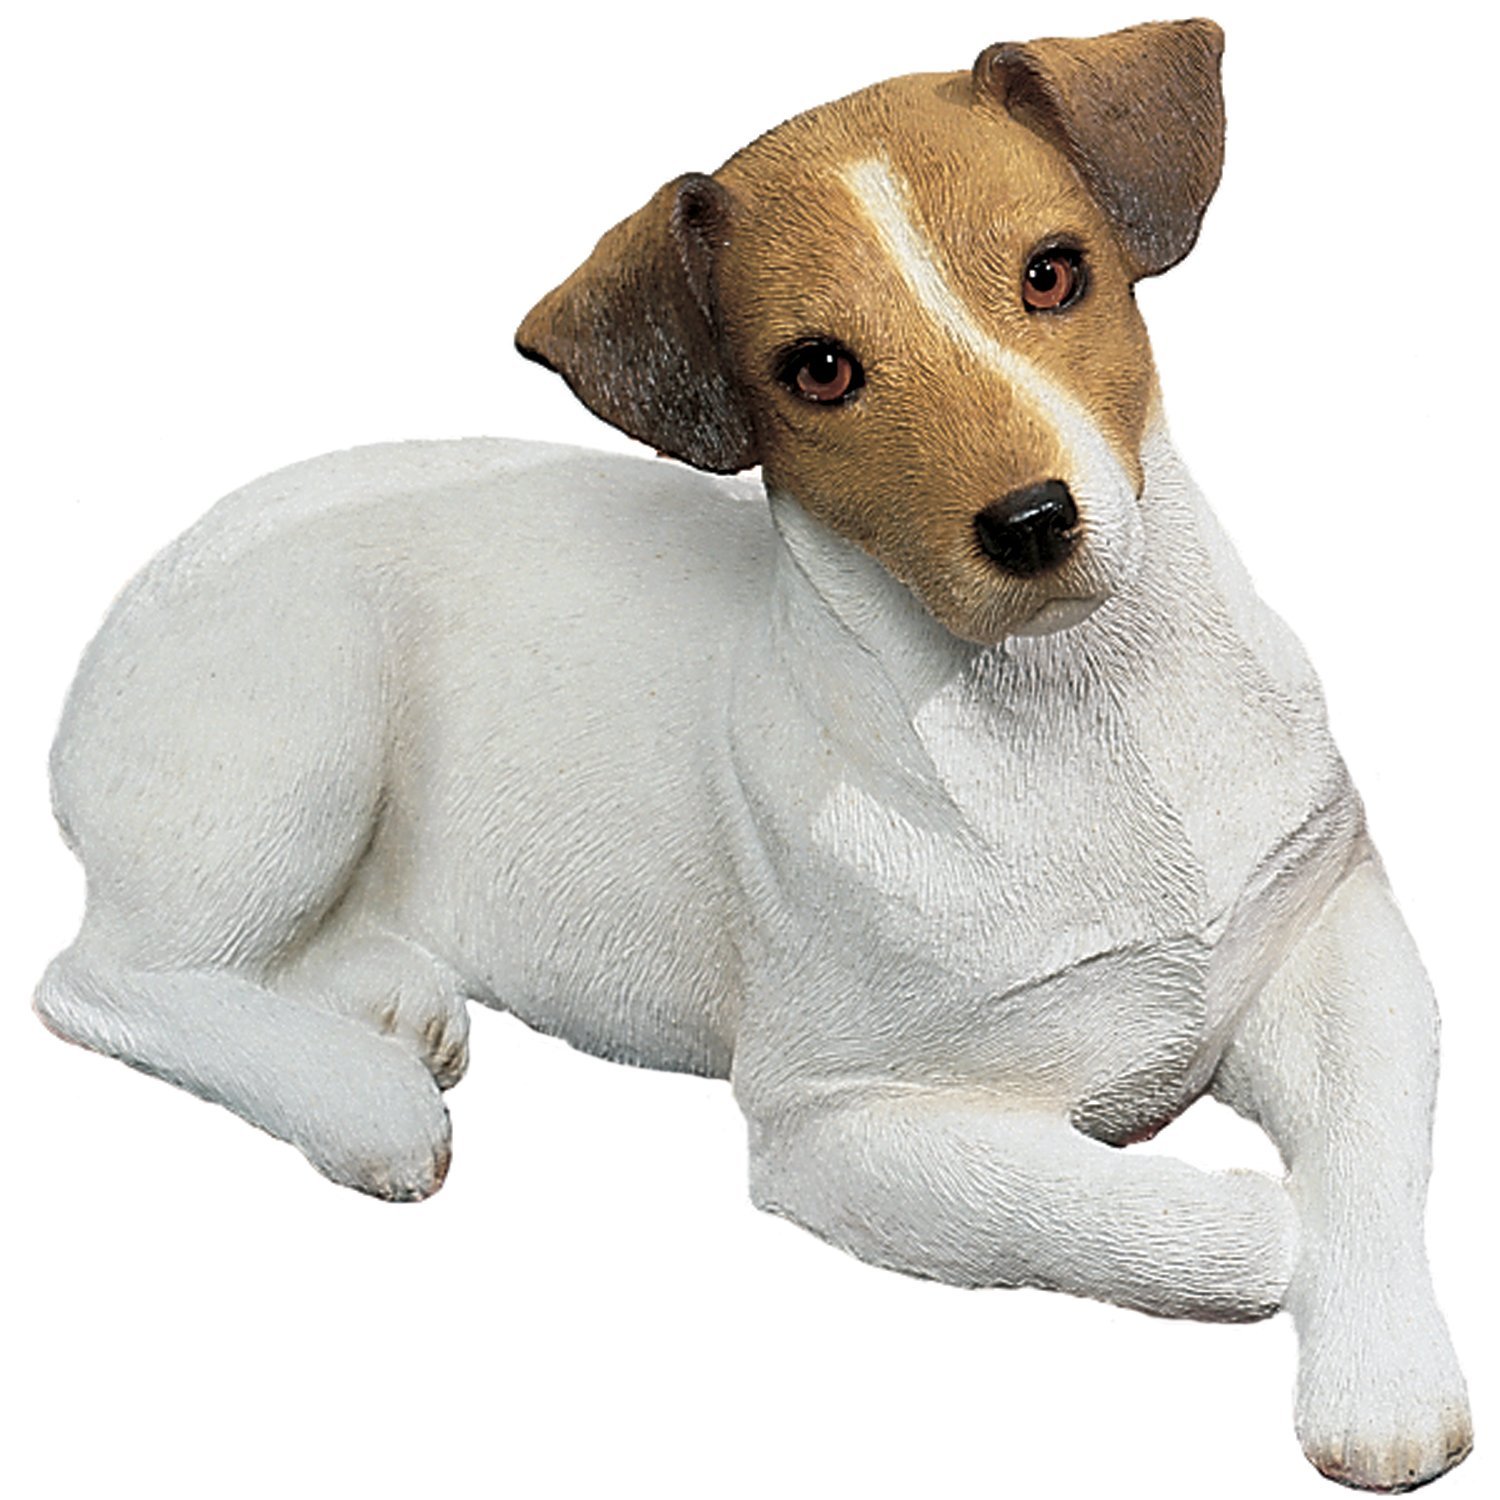 Amazon.com: Sandicast Original Size Brown and White Jack Russell ...